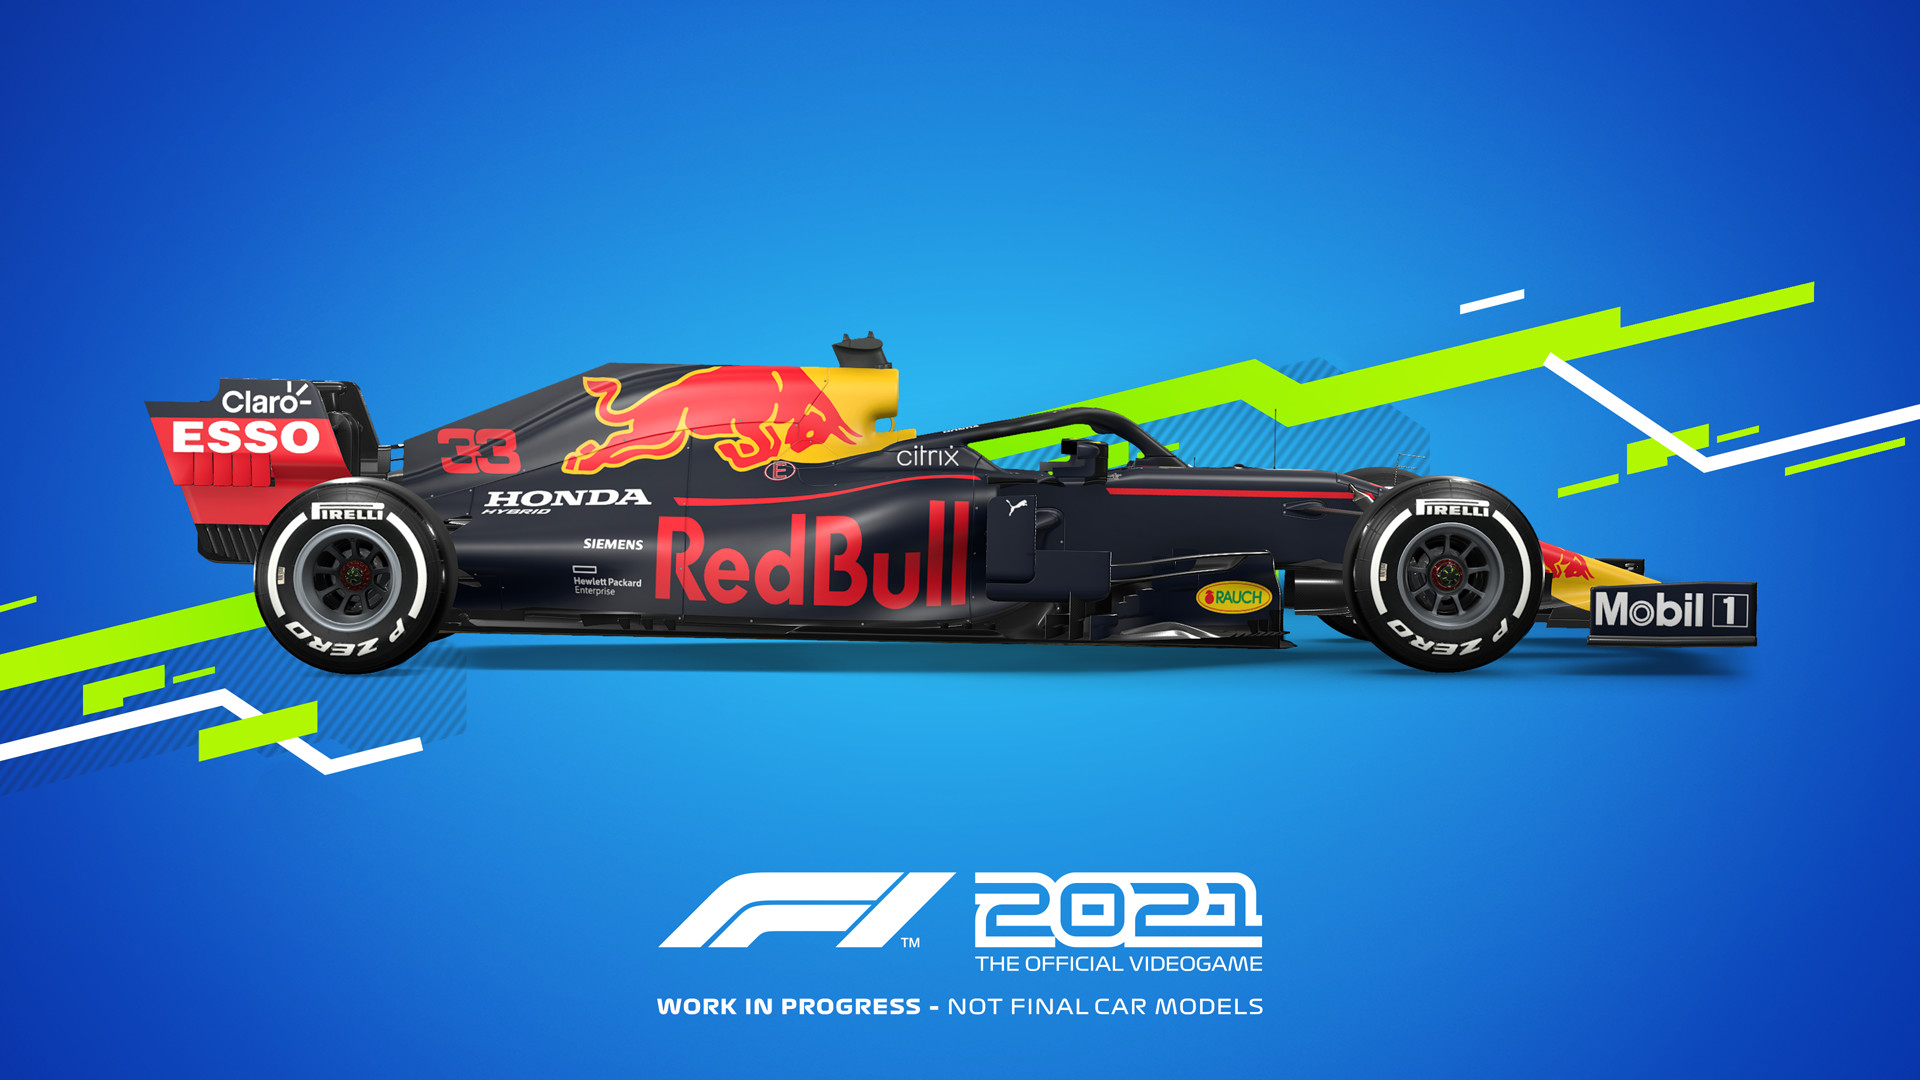 F1 2021 PlayStation 5 Account Pixelpuffin.net Activation Link